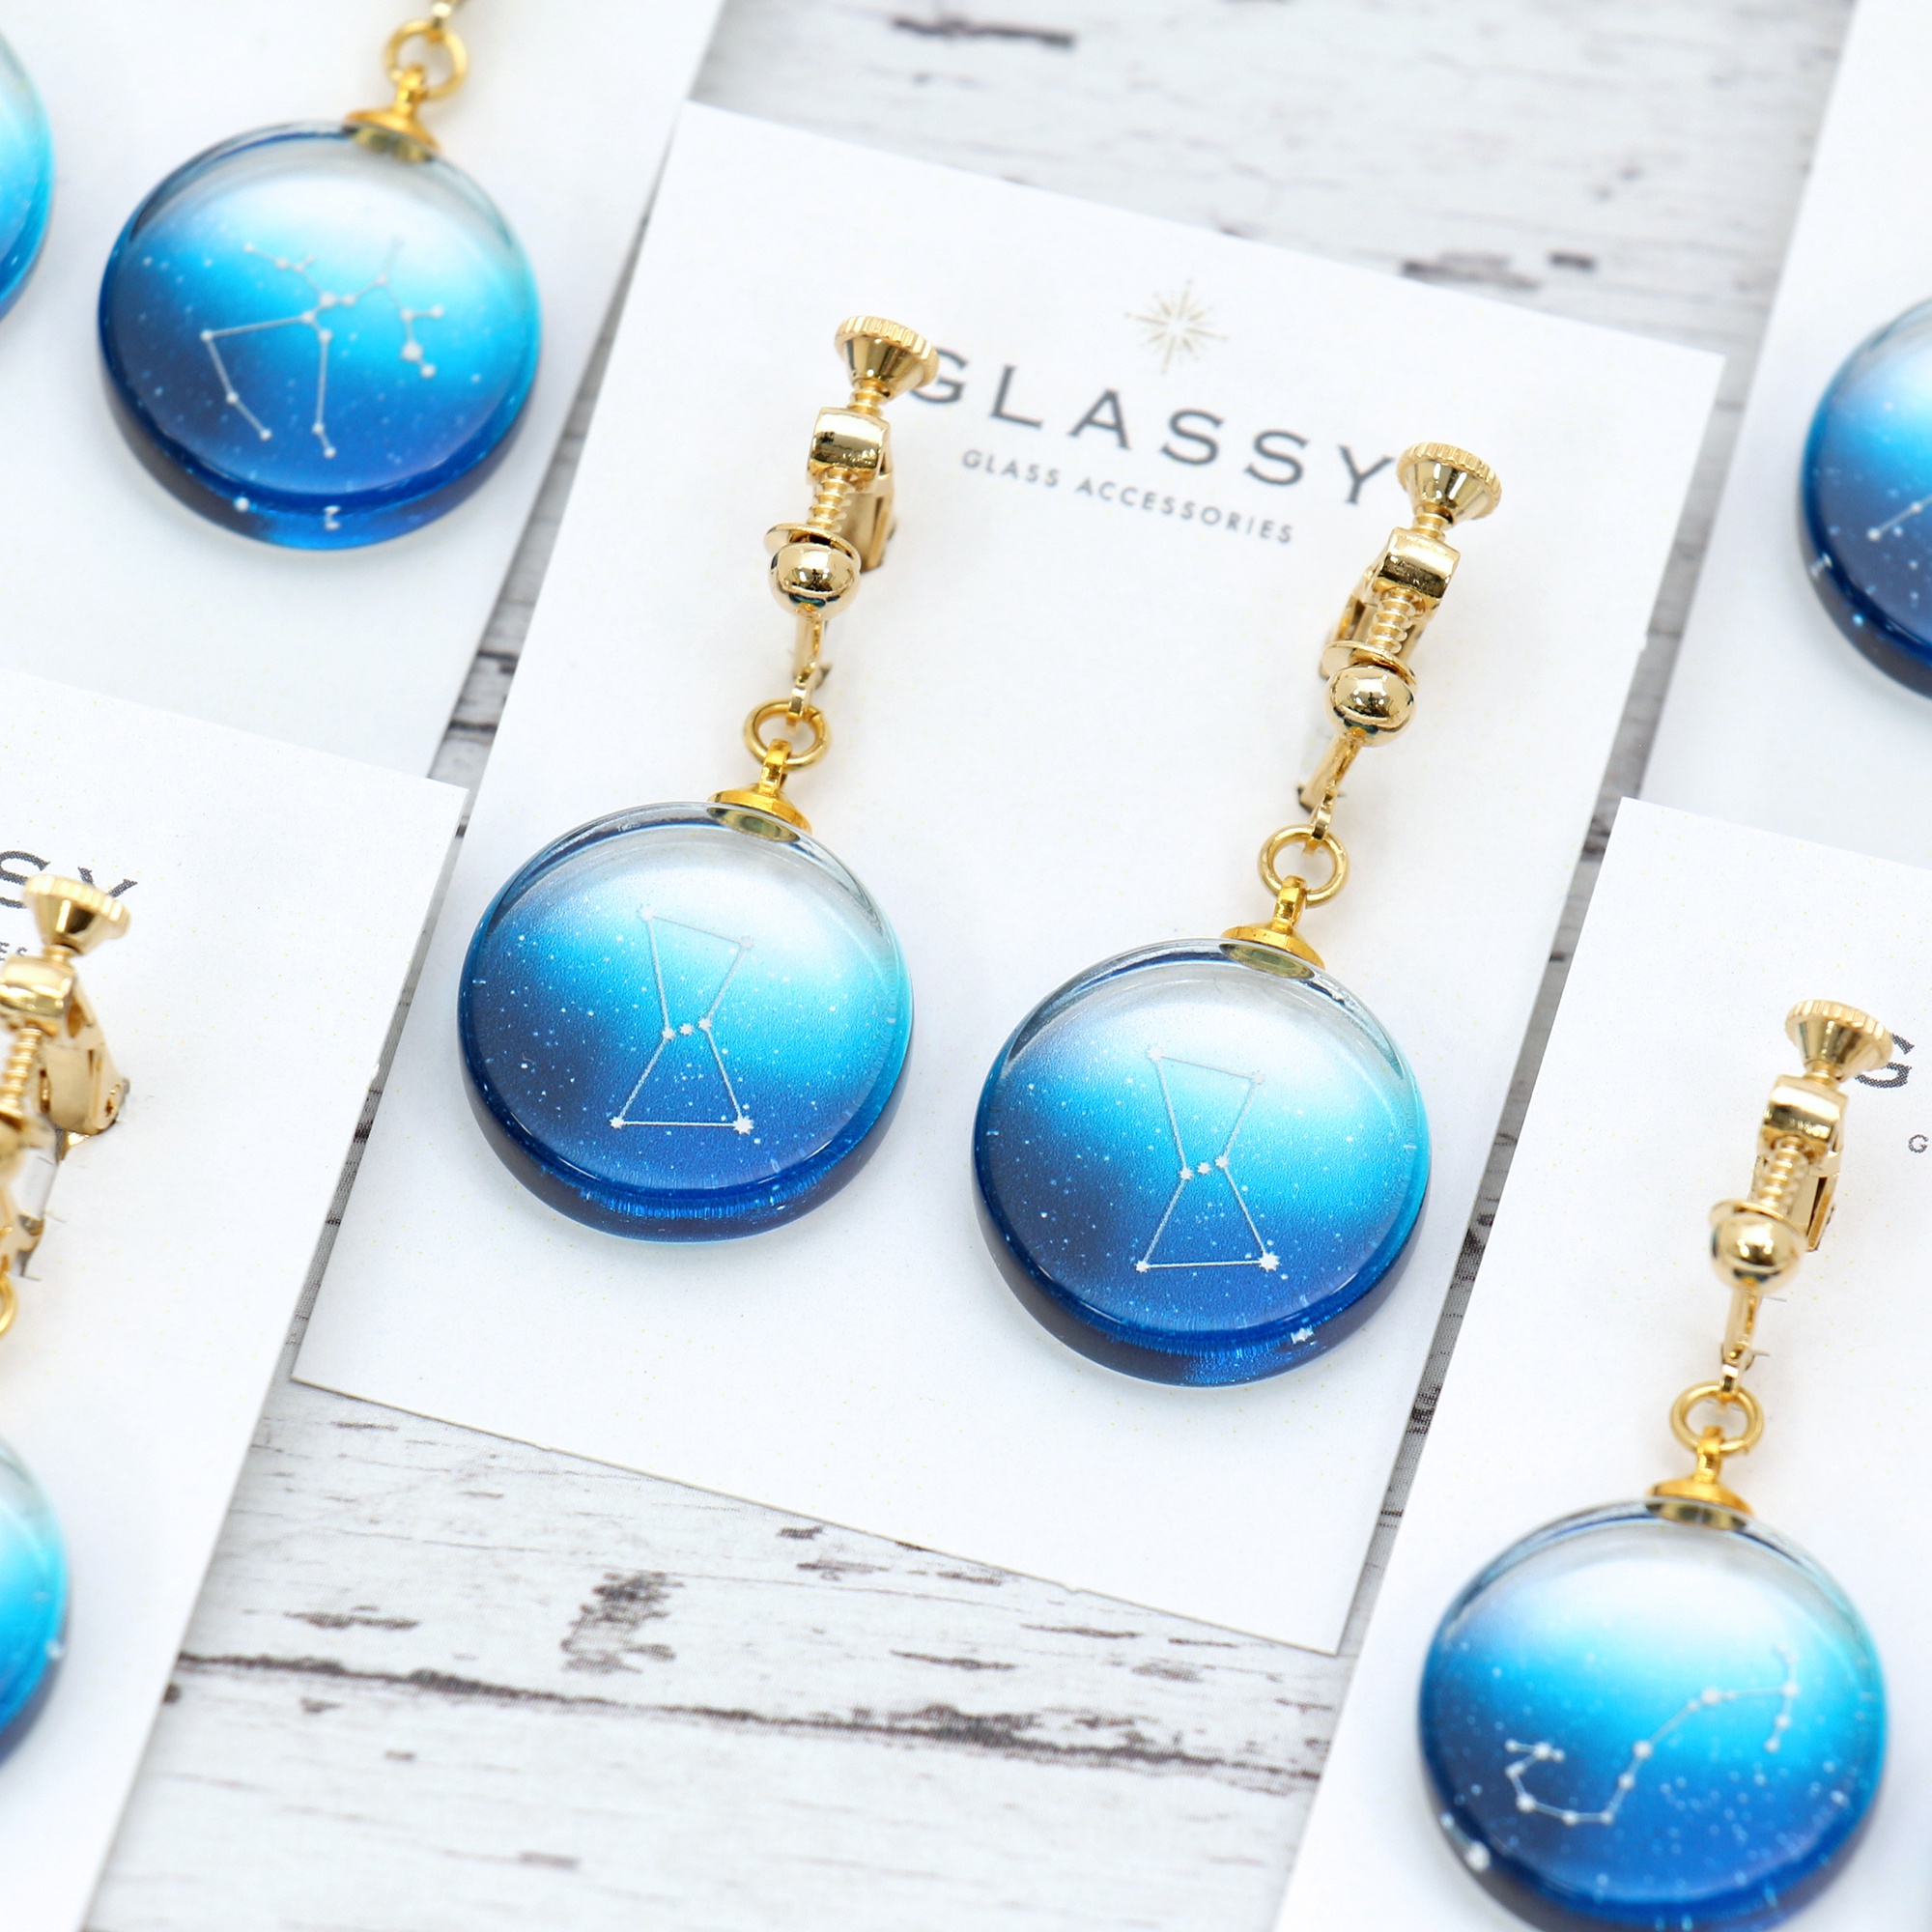 Glass accessories Earring CONSTELLATION Libra round shape